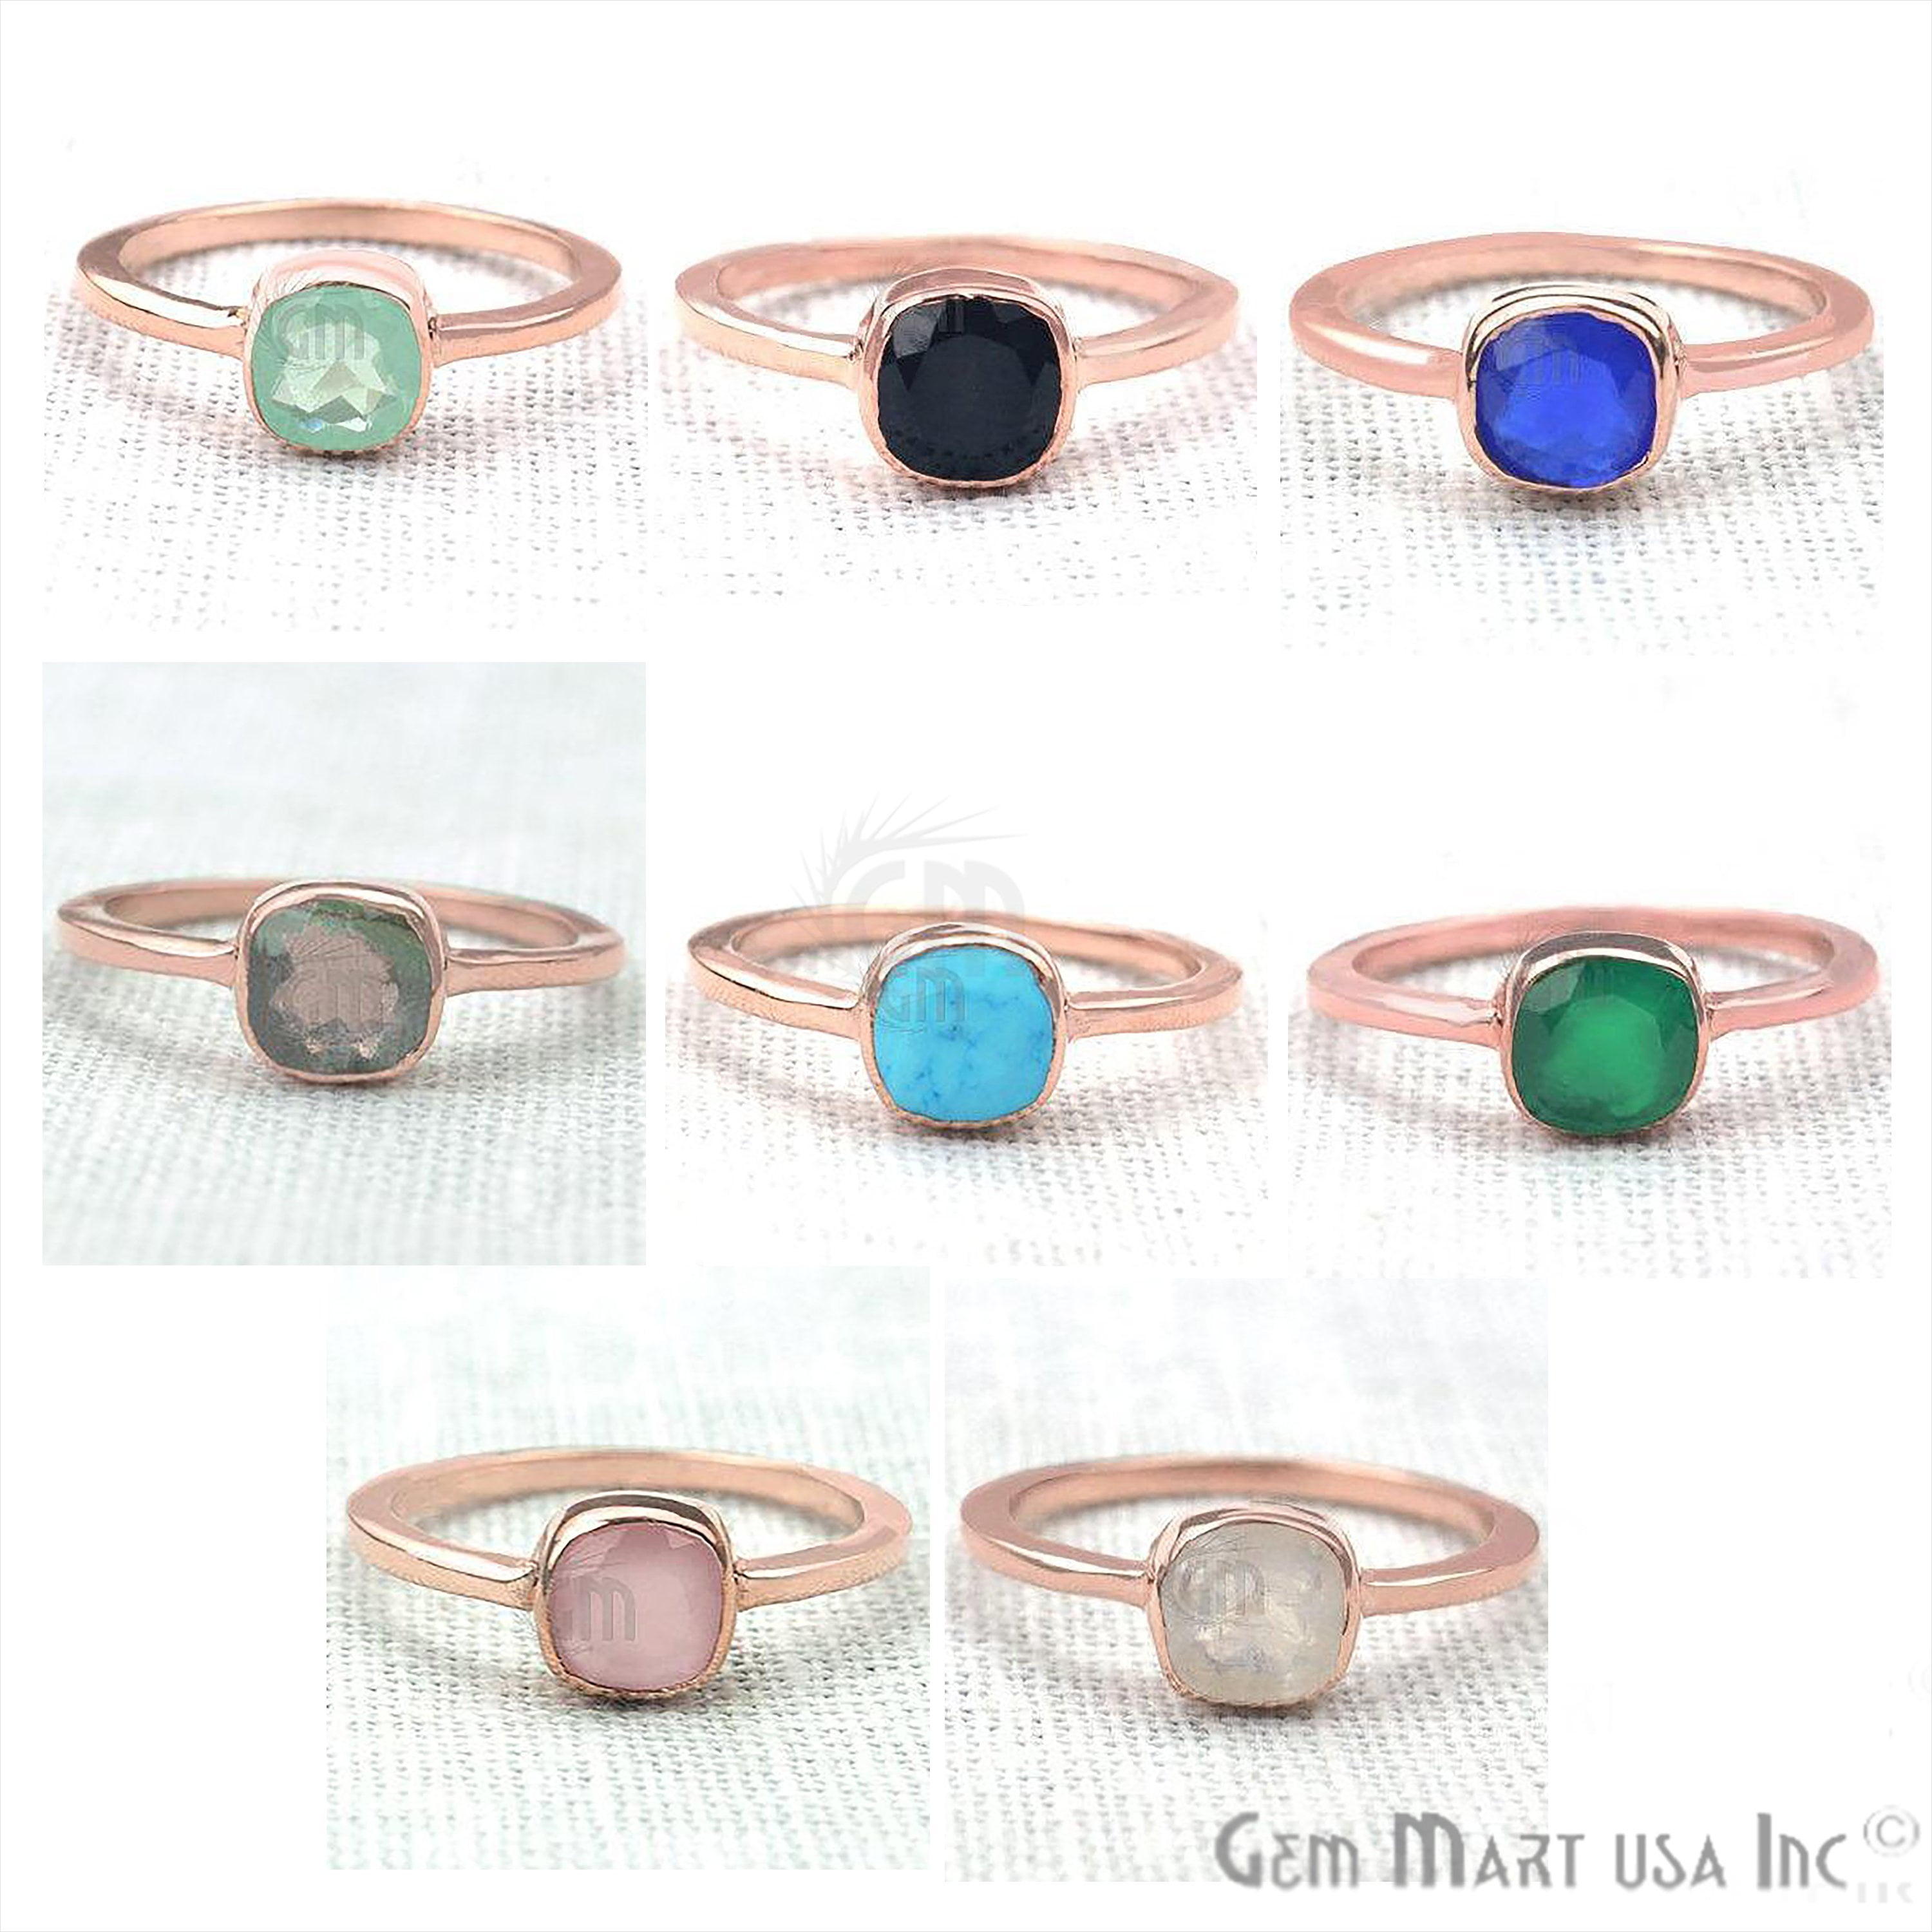 Gemmart Created Blue Opal Silver Plated Cross rose gold engagement ring ladies fashion rings